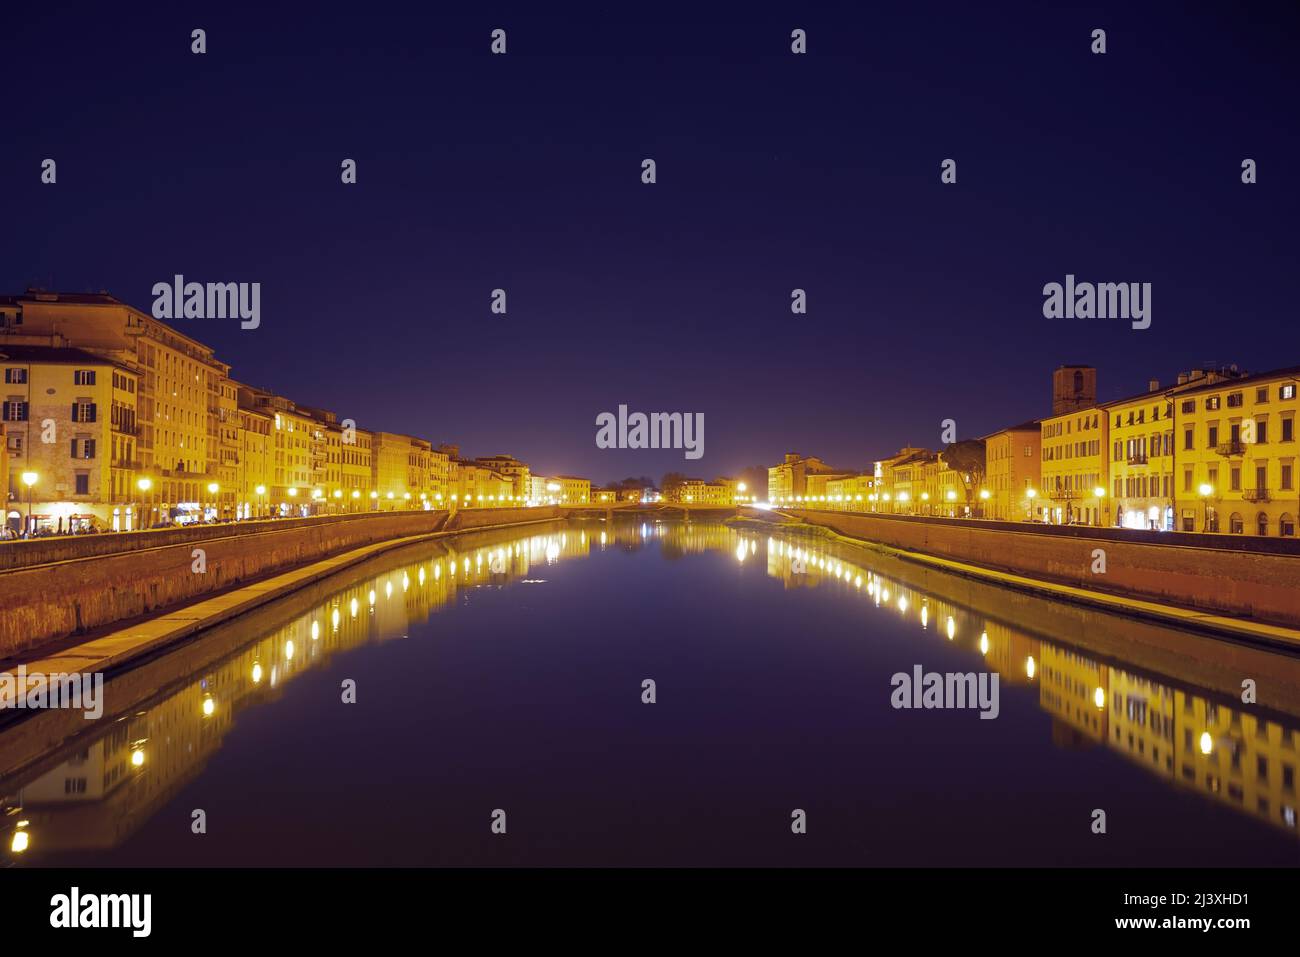 Houses lit with golden light and their reflections in the Arno River at night in Pisa, Italy. Panoramic view Stock Photo